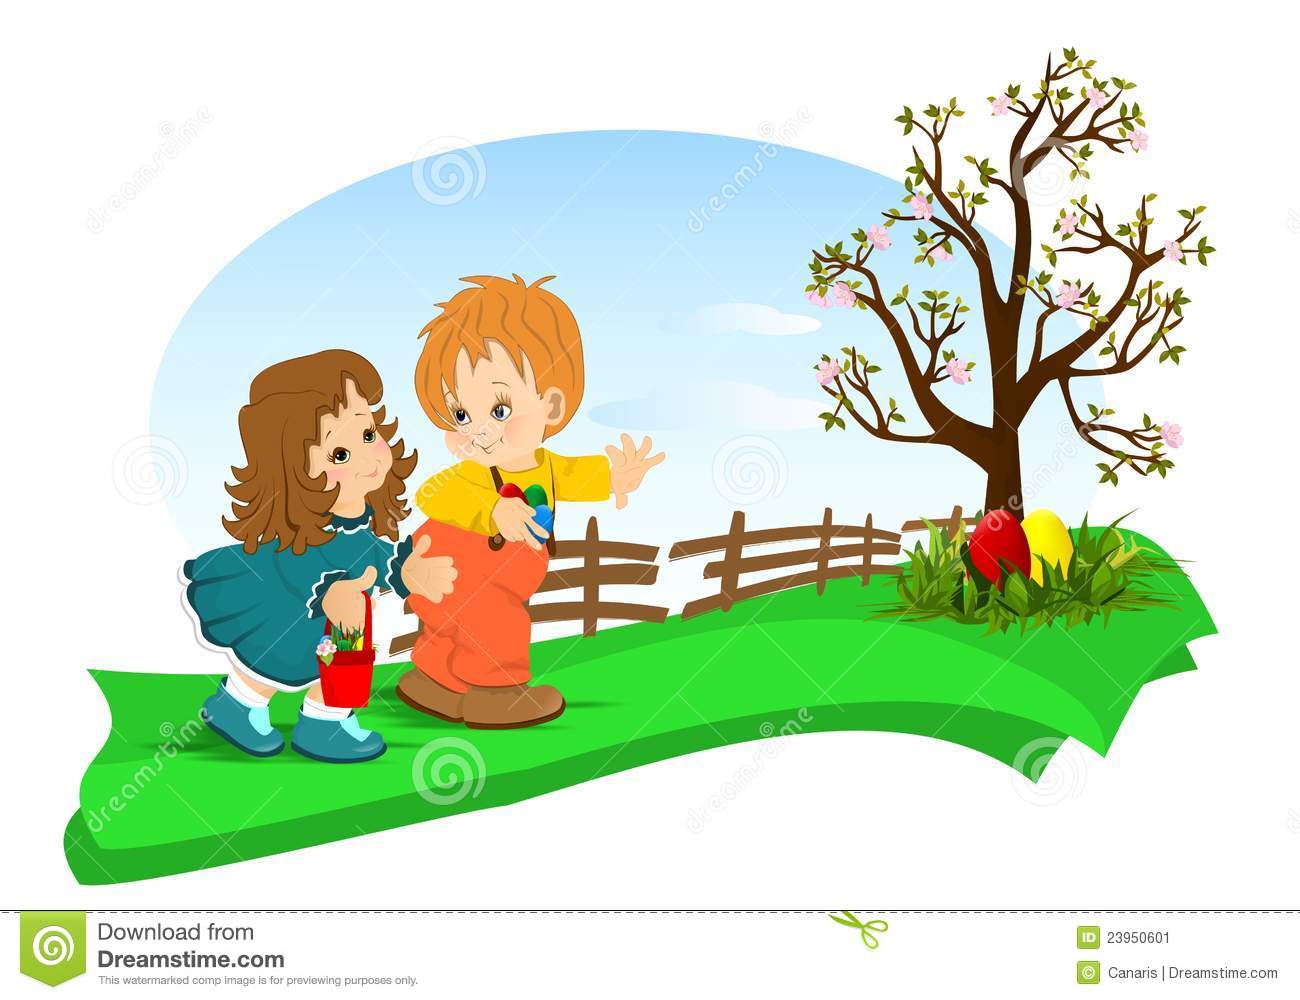 Clipart of kids hunting easter eggs - ClipartFest. Clipart Of Kids Hunting Easter Eggs ClipartFest